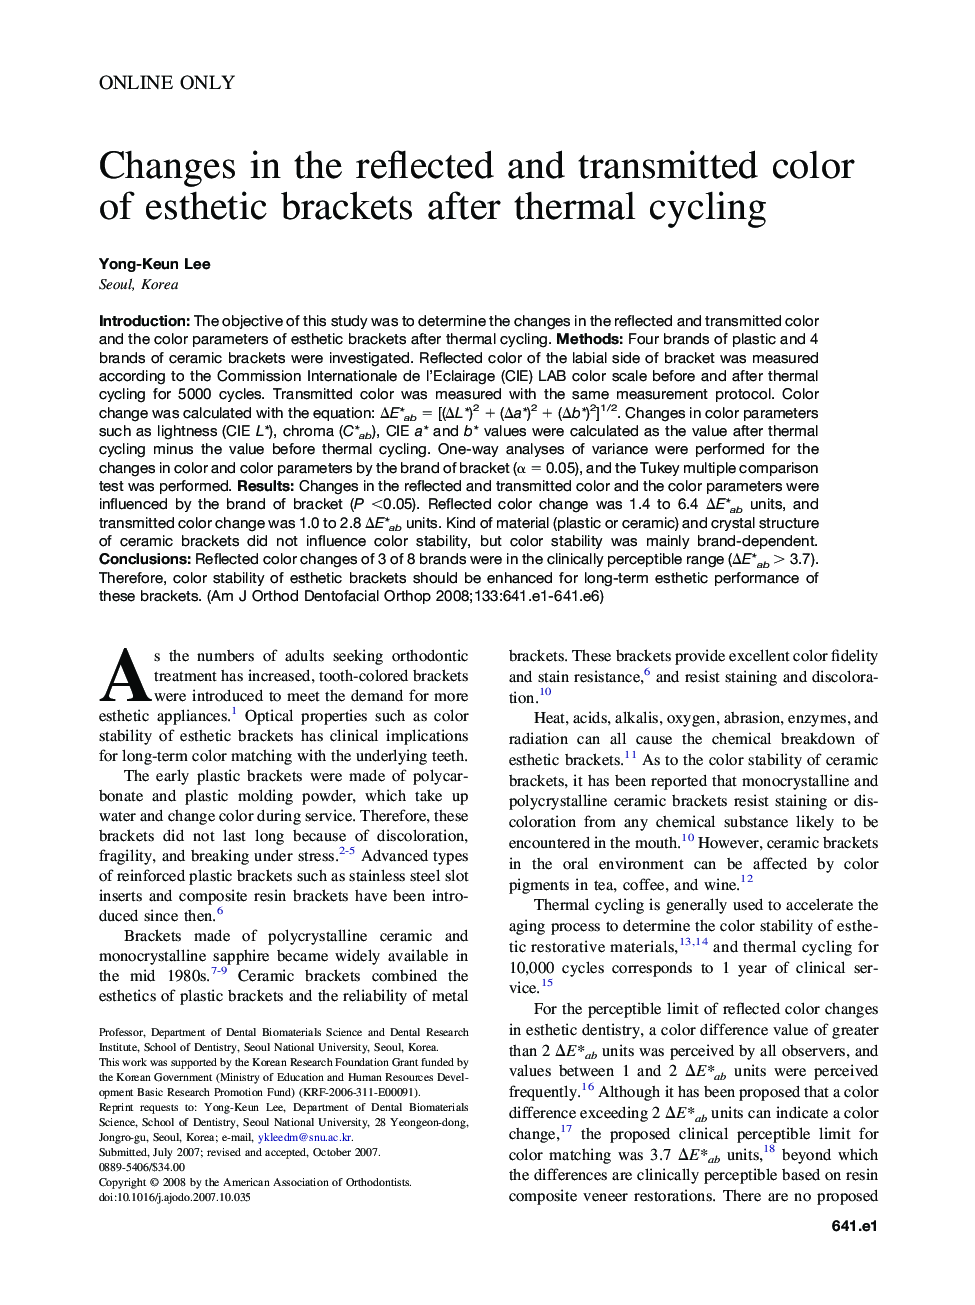 Changes in the reflected and transmitted color of esthetic brackets after thermal cycling